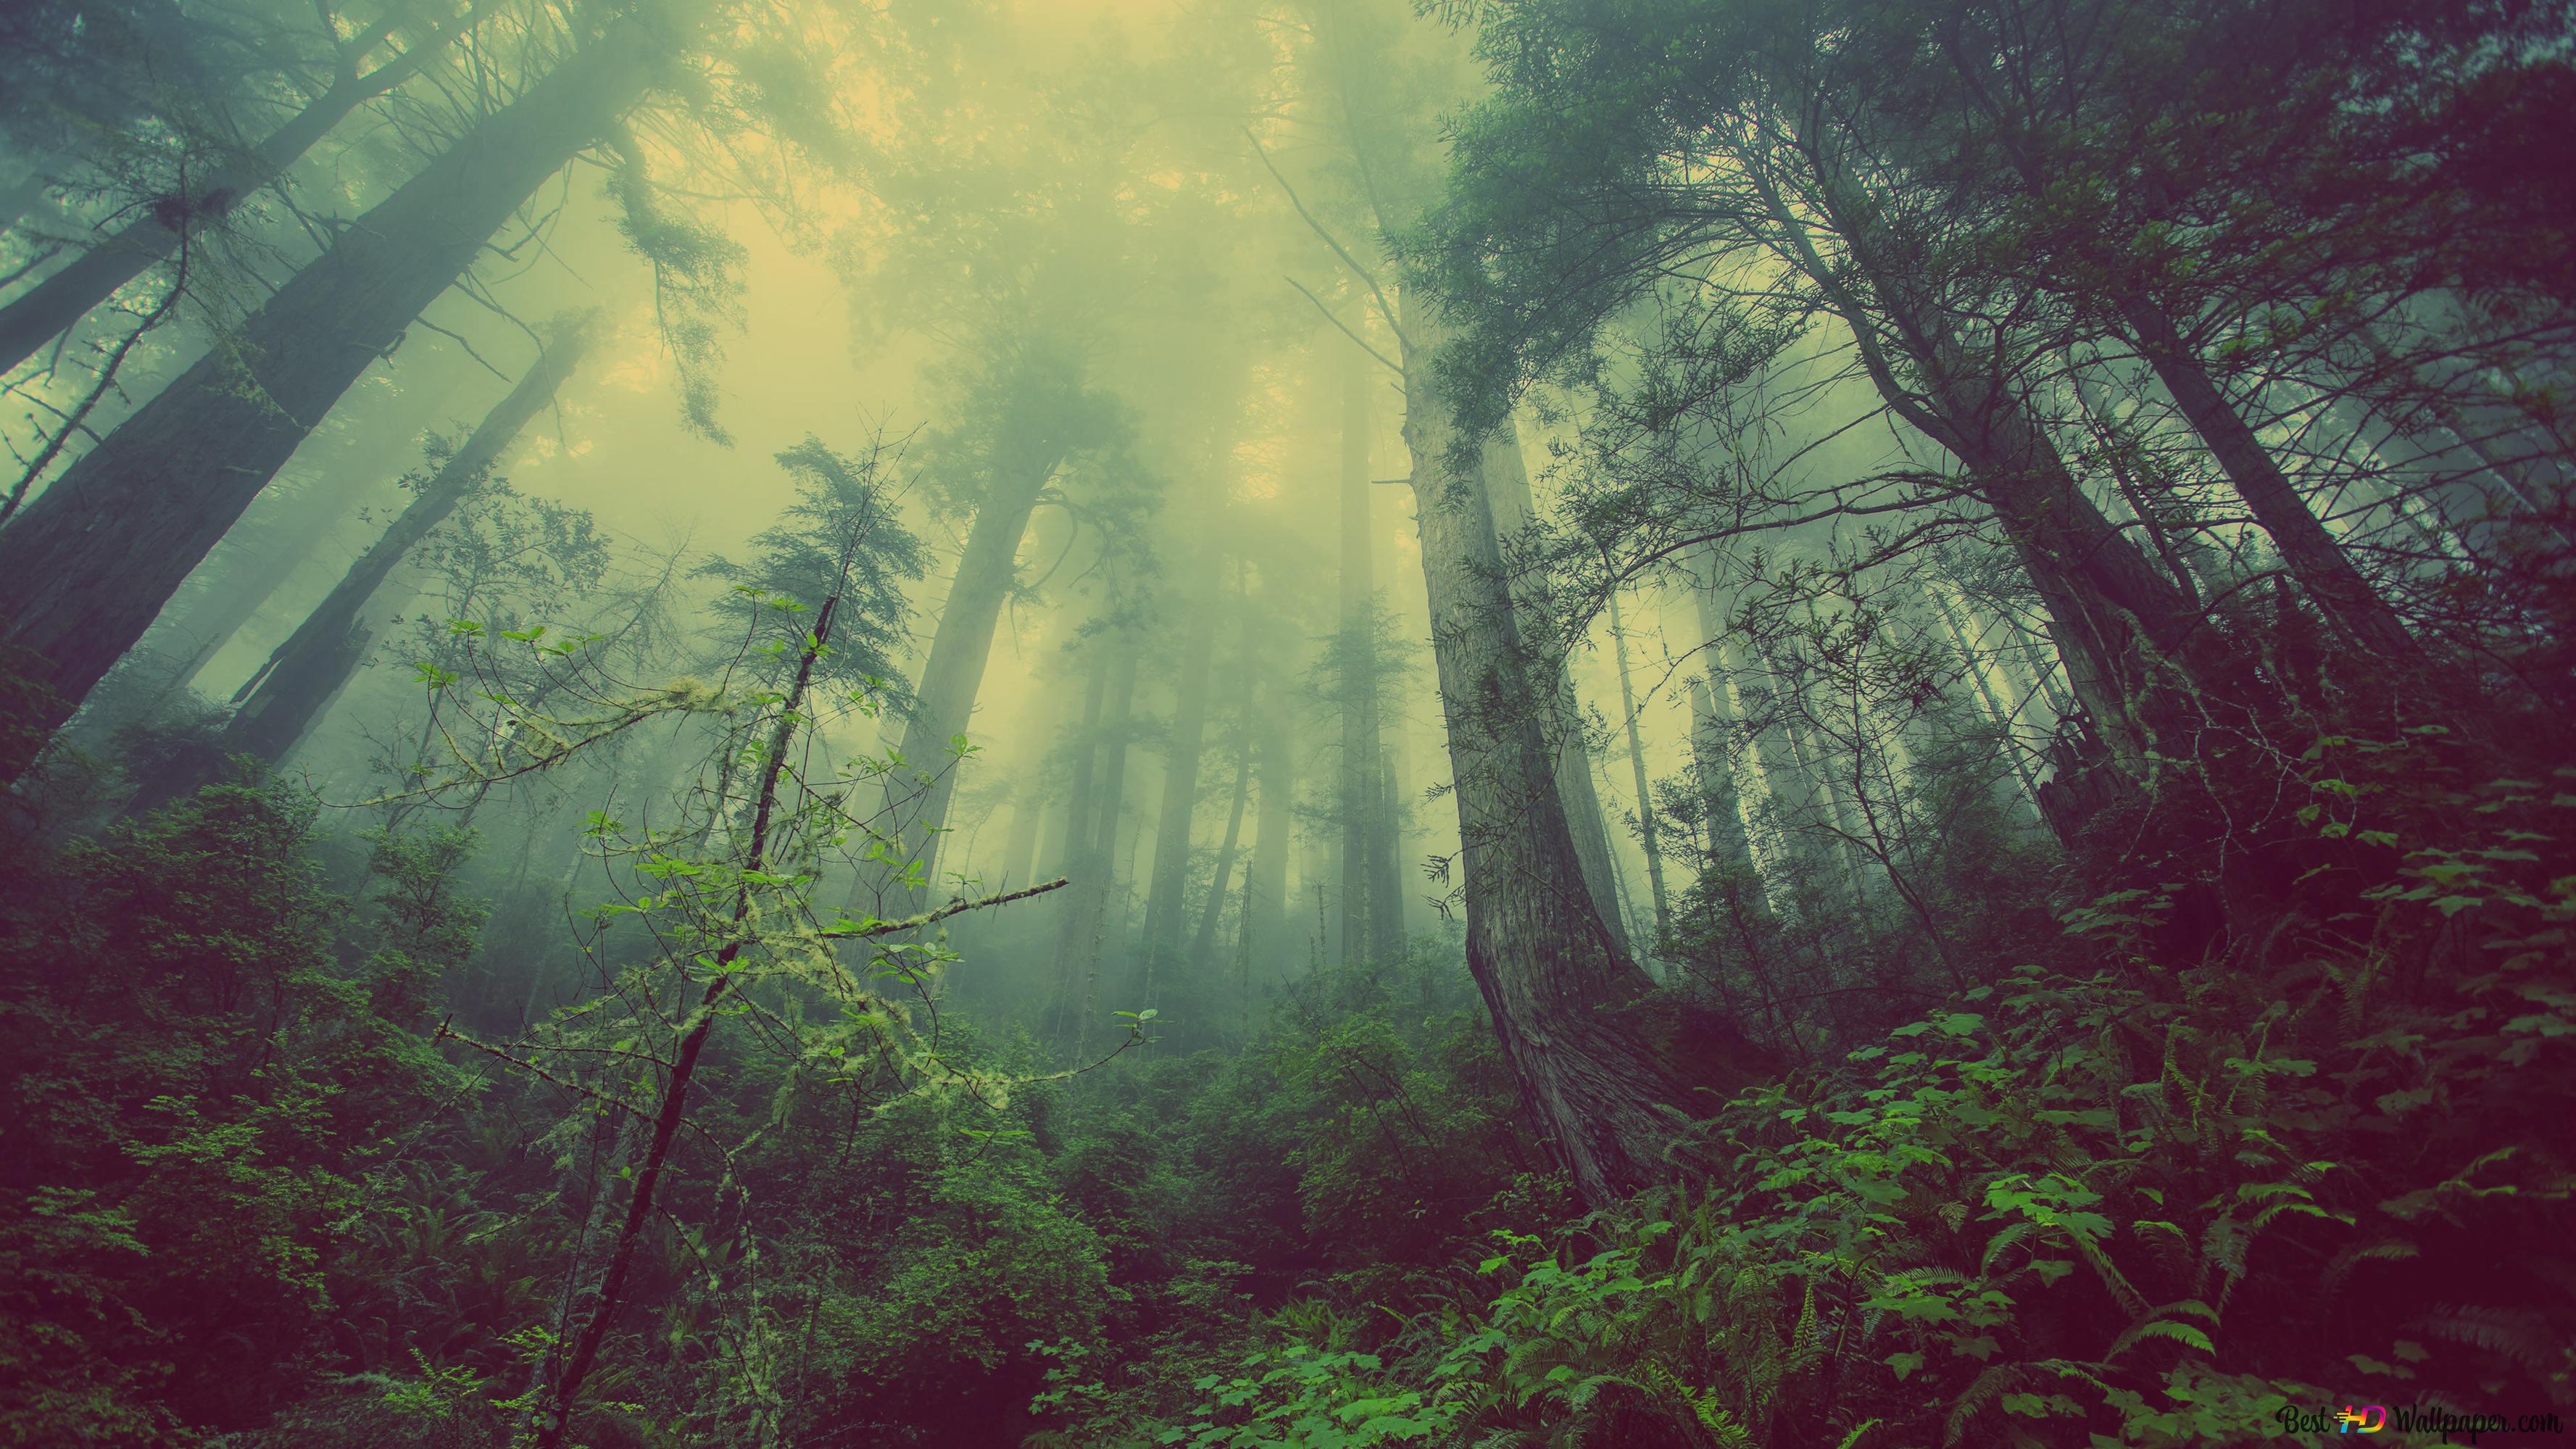 Rainy Forests 4K wallpaper download